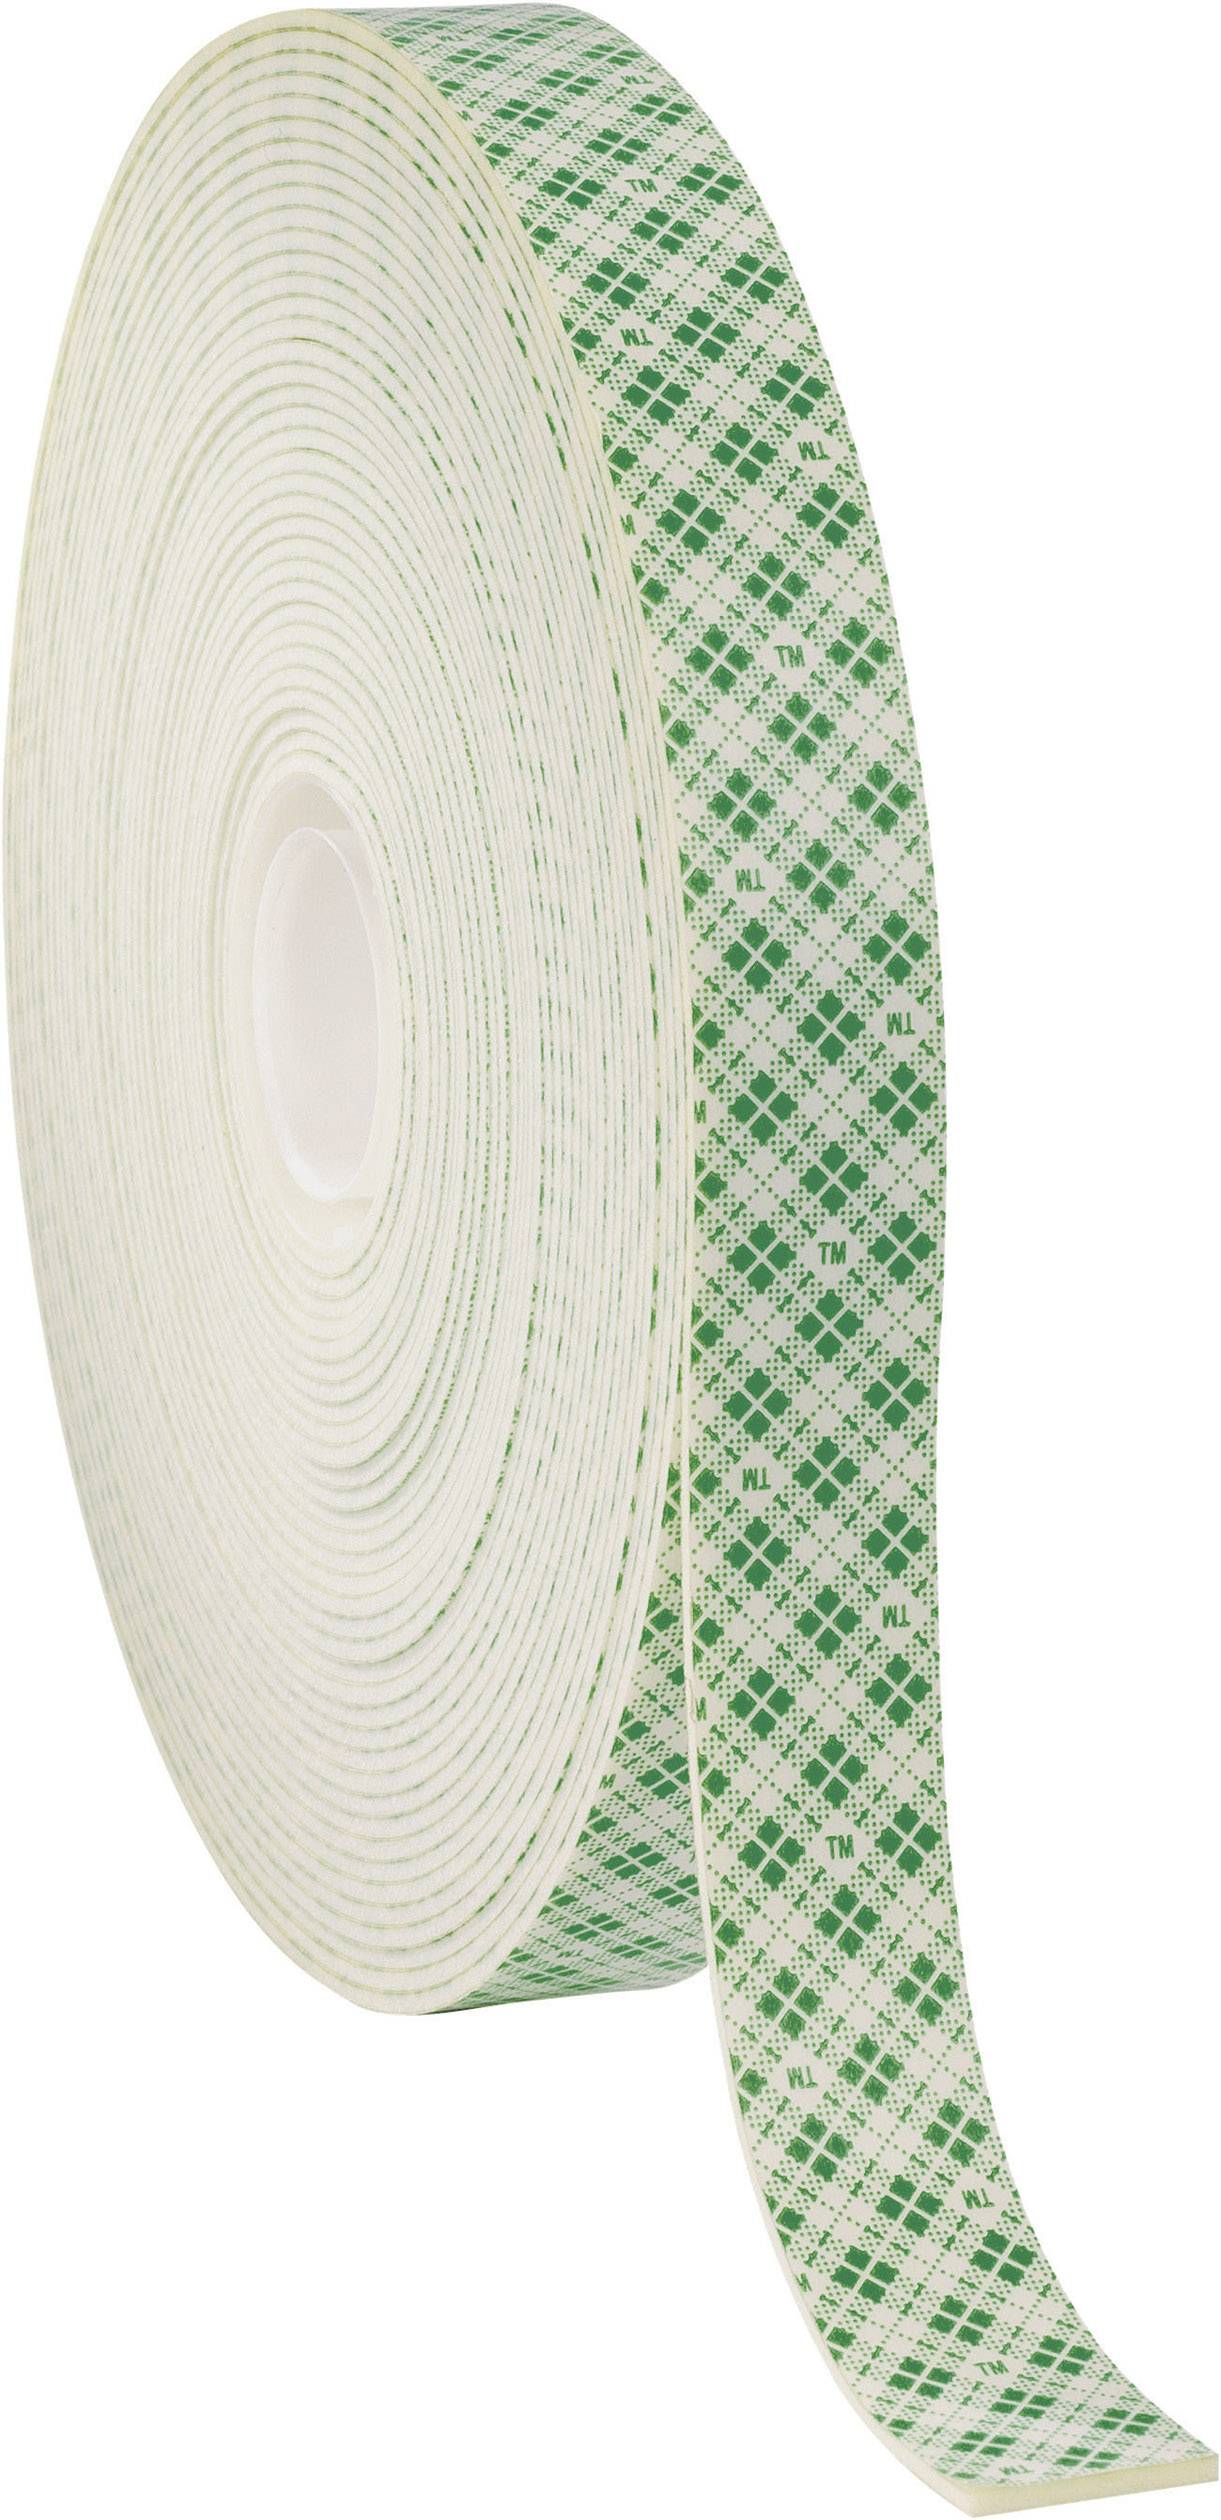 home depot outdoor double sided tape